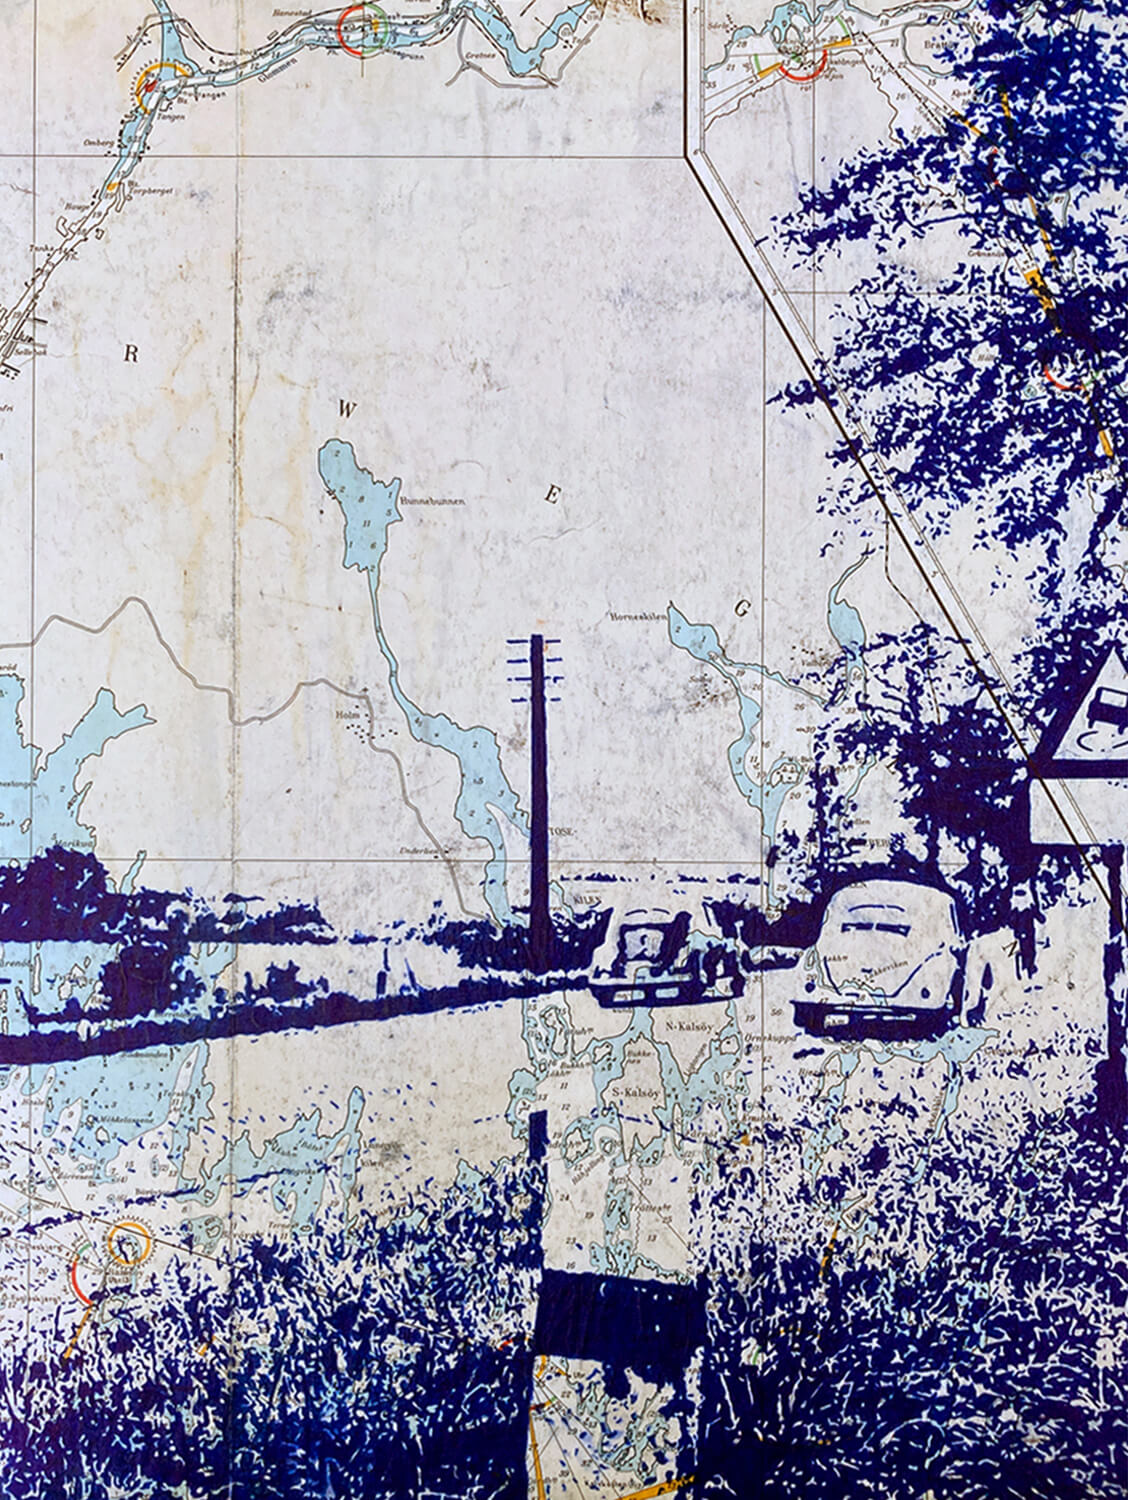 Peer Boehm, Guessing number plates, 2022, pen on nautical chart on wood, 40 x 30 cm